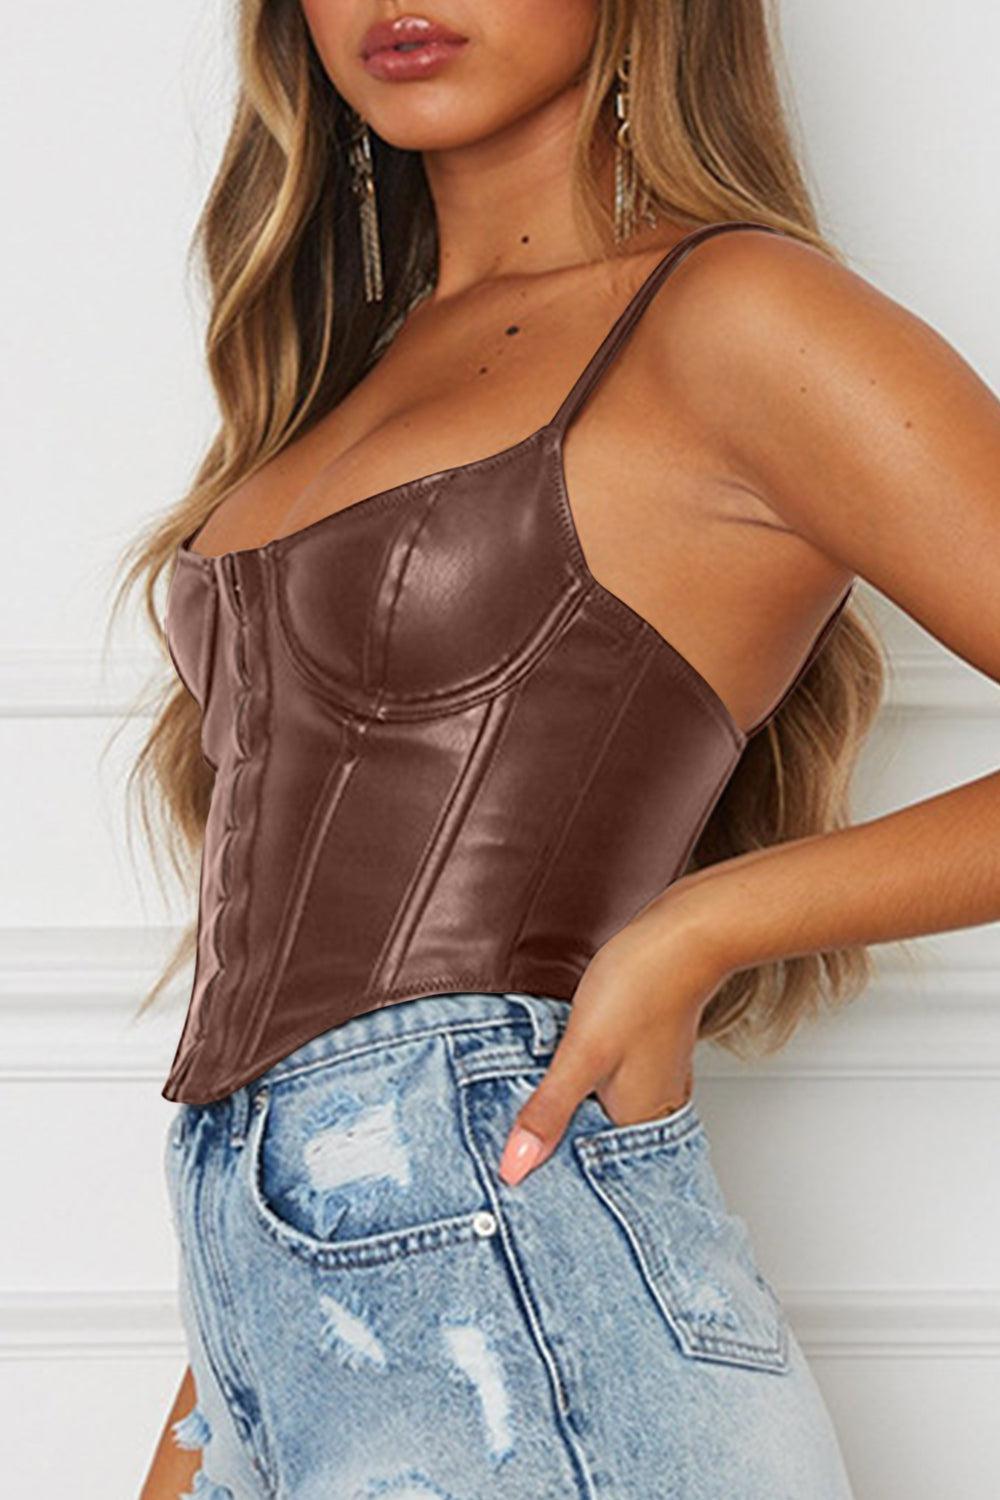 a woman wearing a brown leather corset